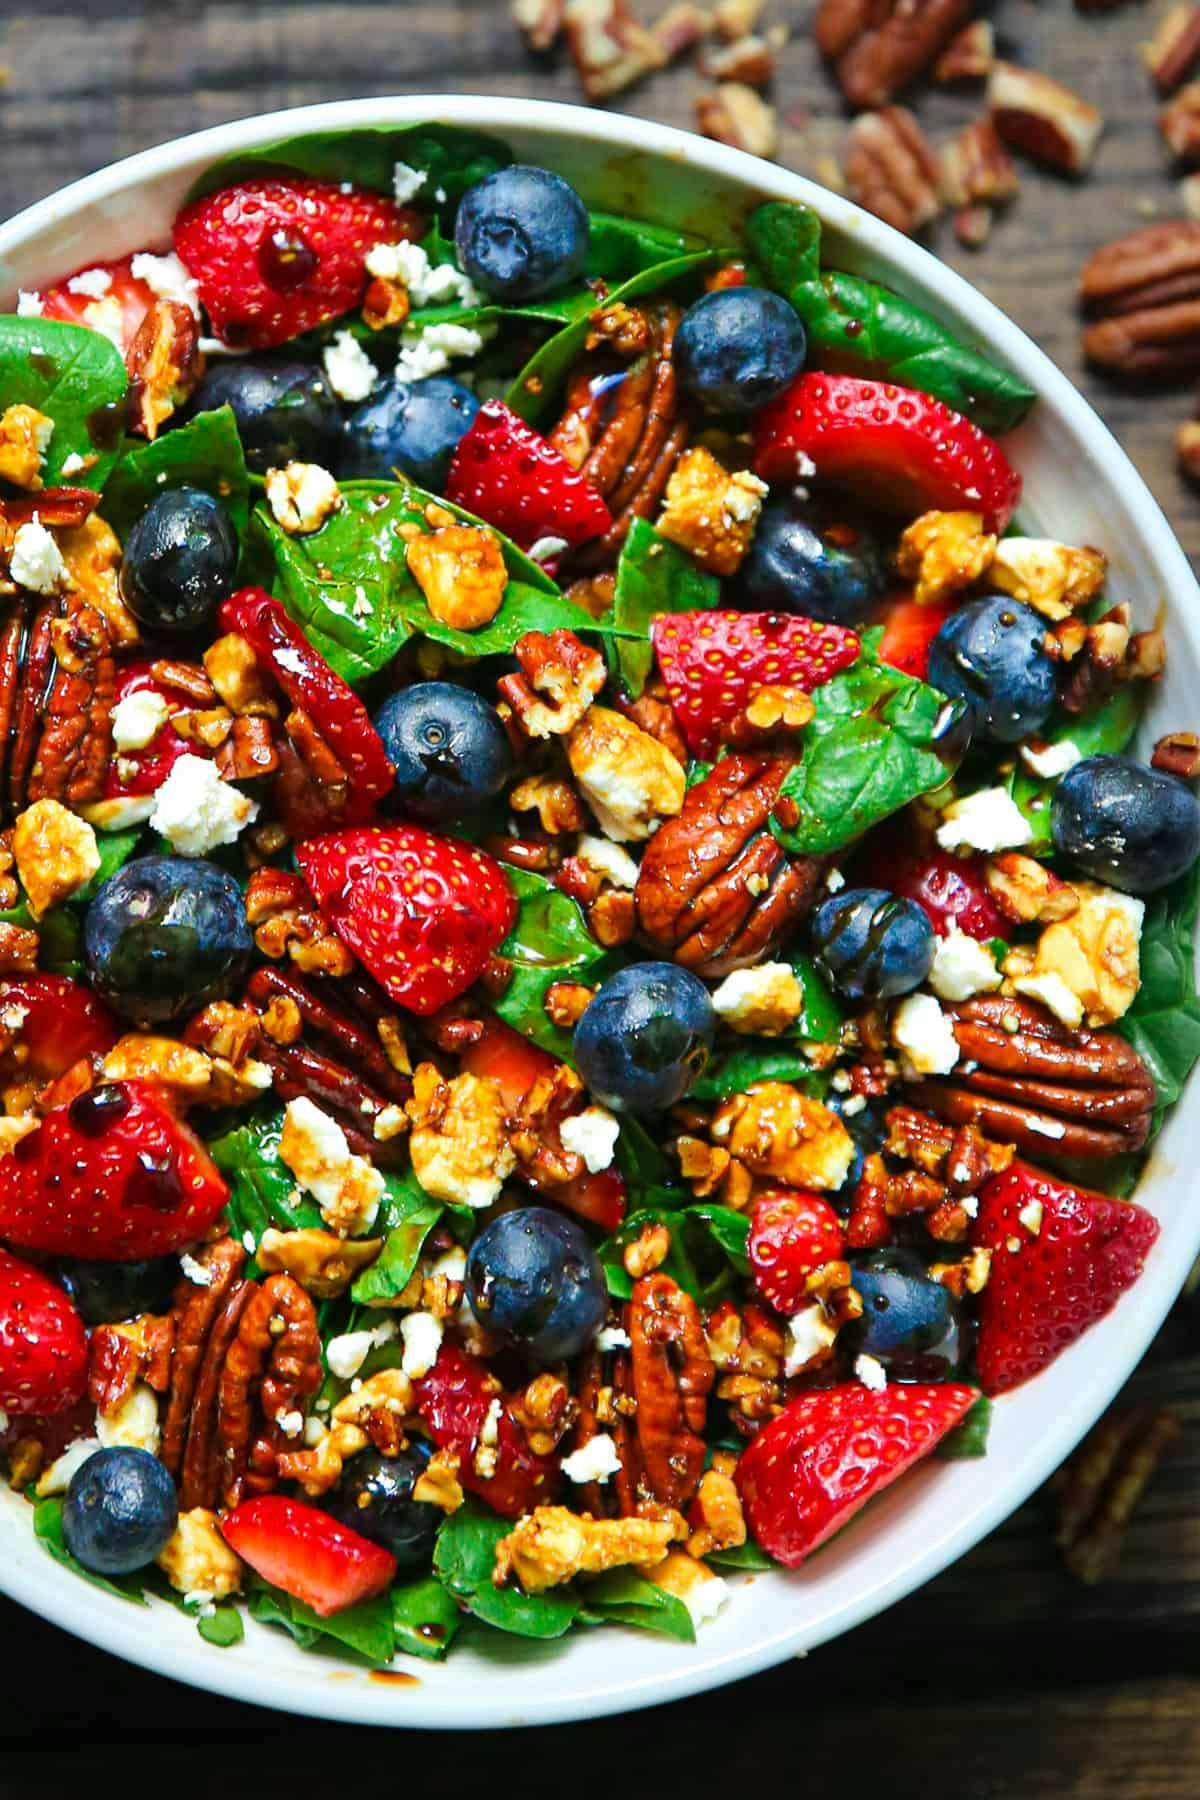 Strawberry Spinach Salad with Blueberries, Pecans, Feta, and Balsamic Glaze